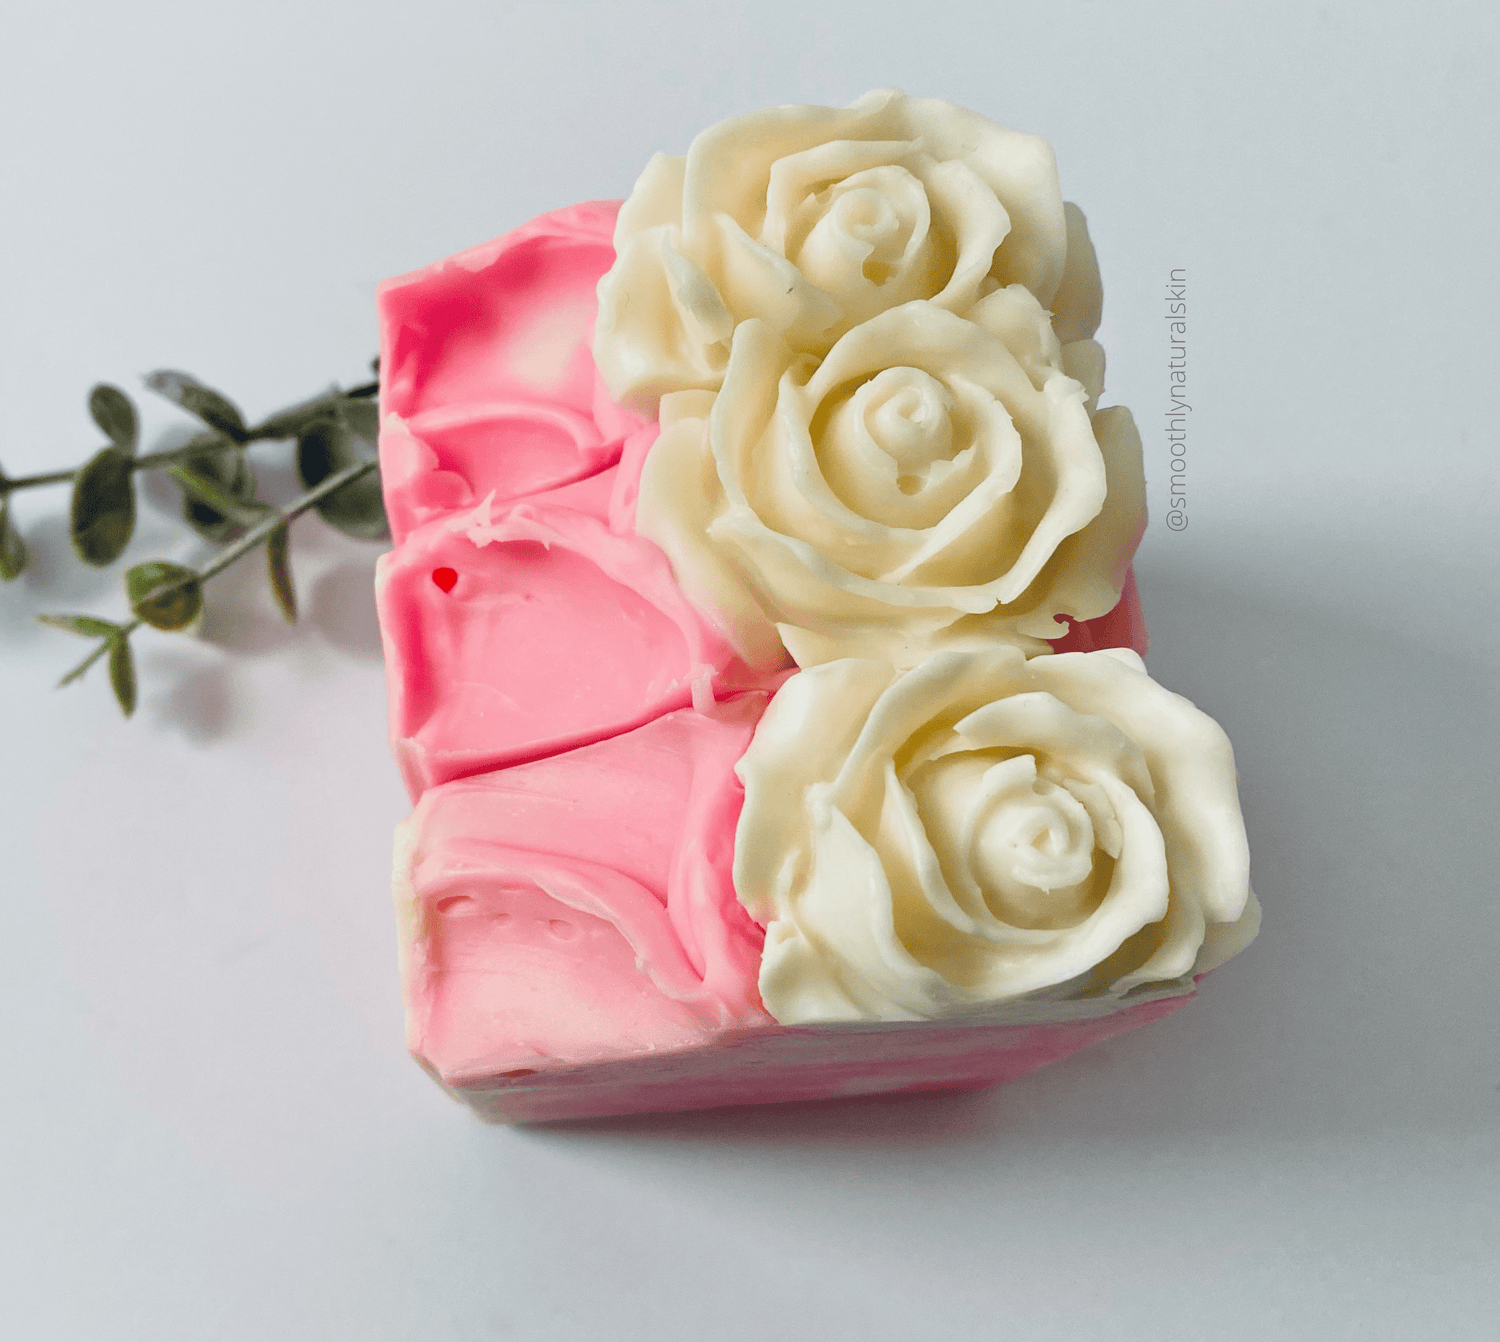 La Juicy Soap; has a mix of wild berry and mandarin wrapped in the floralcy of summer gardenia, pink jasmine and bright honeysuckle enhanced by vanilla praline, soft woods and amber. Smoothly Natural Skin